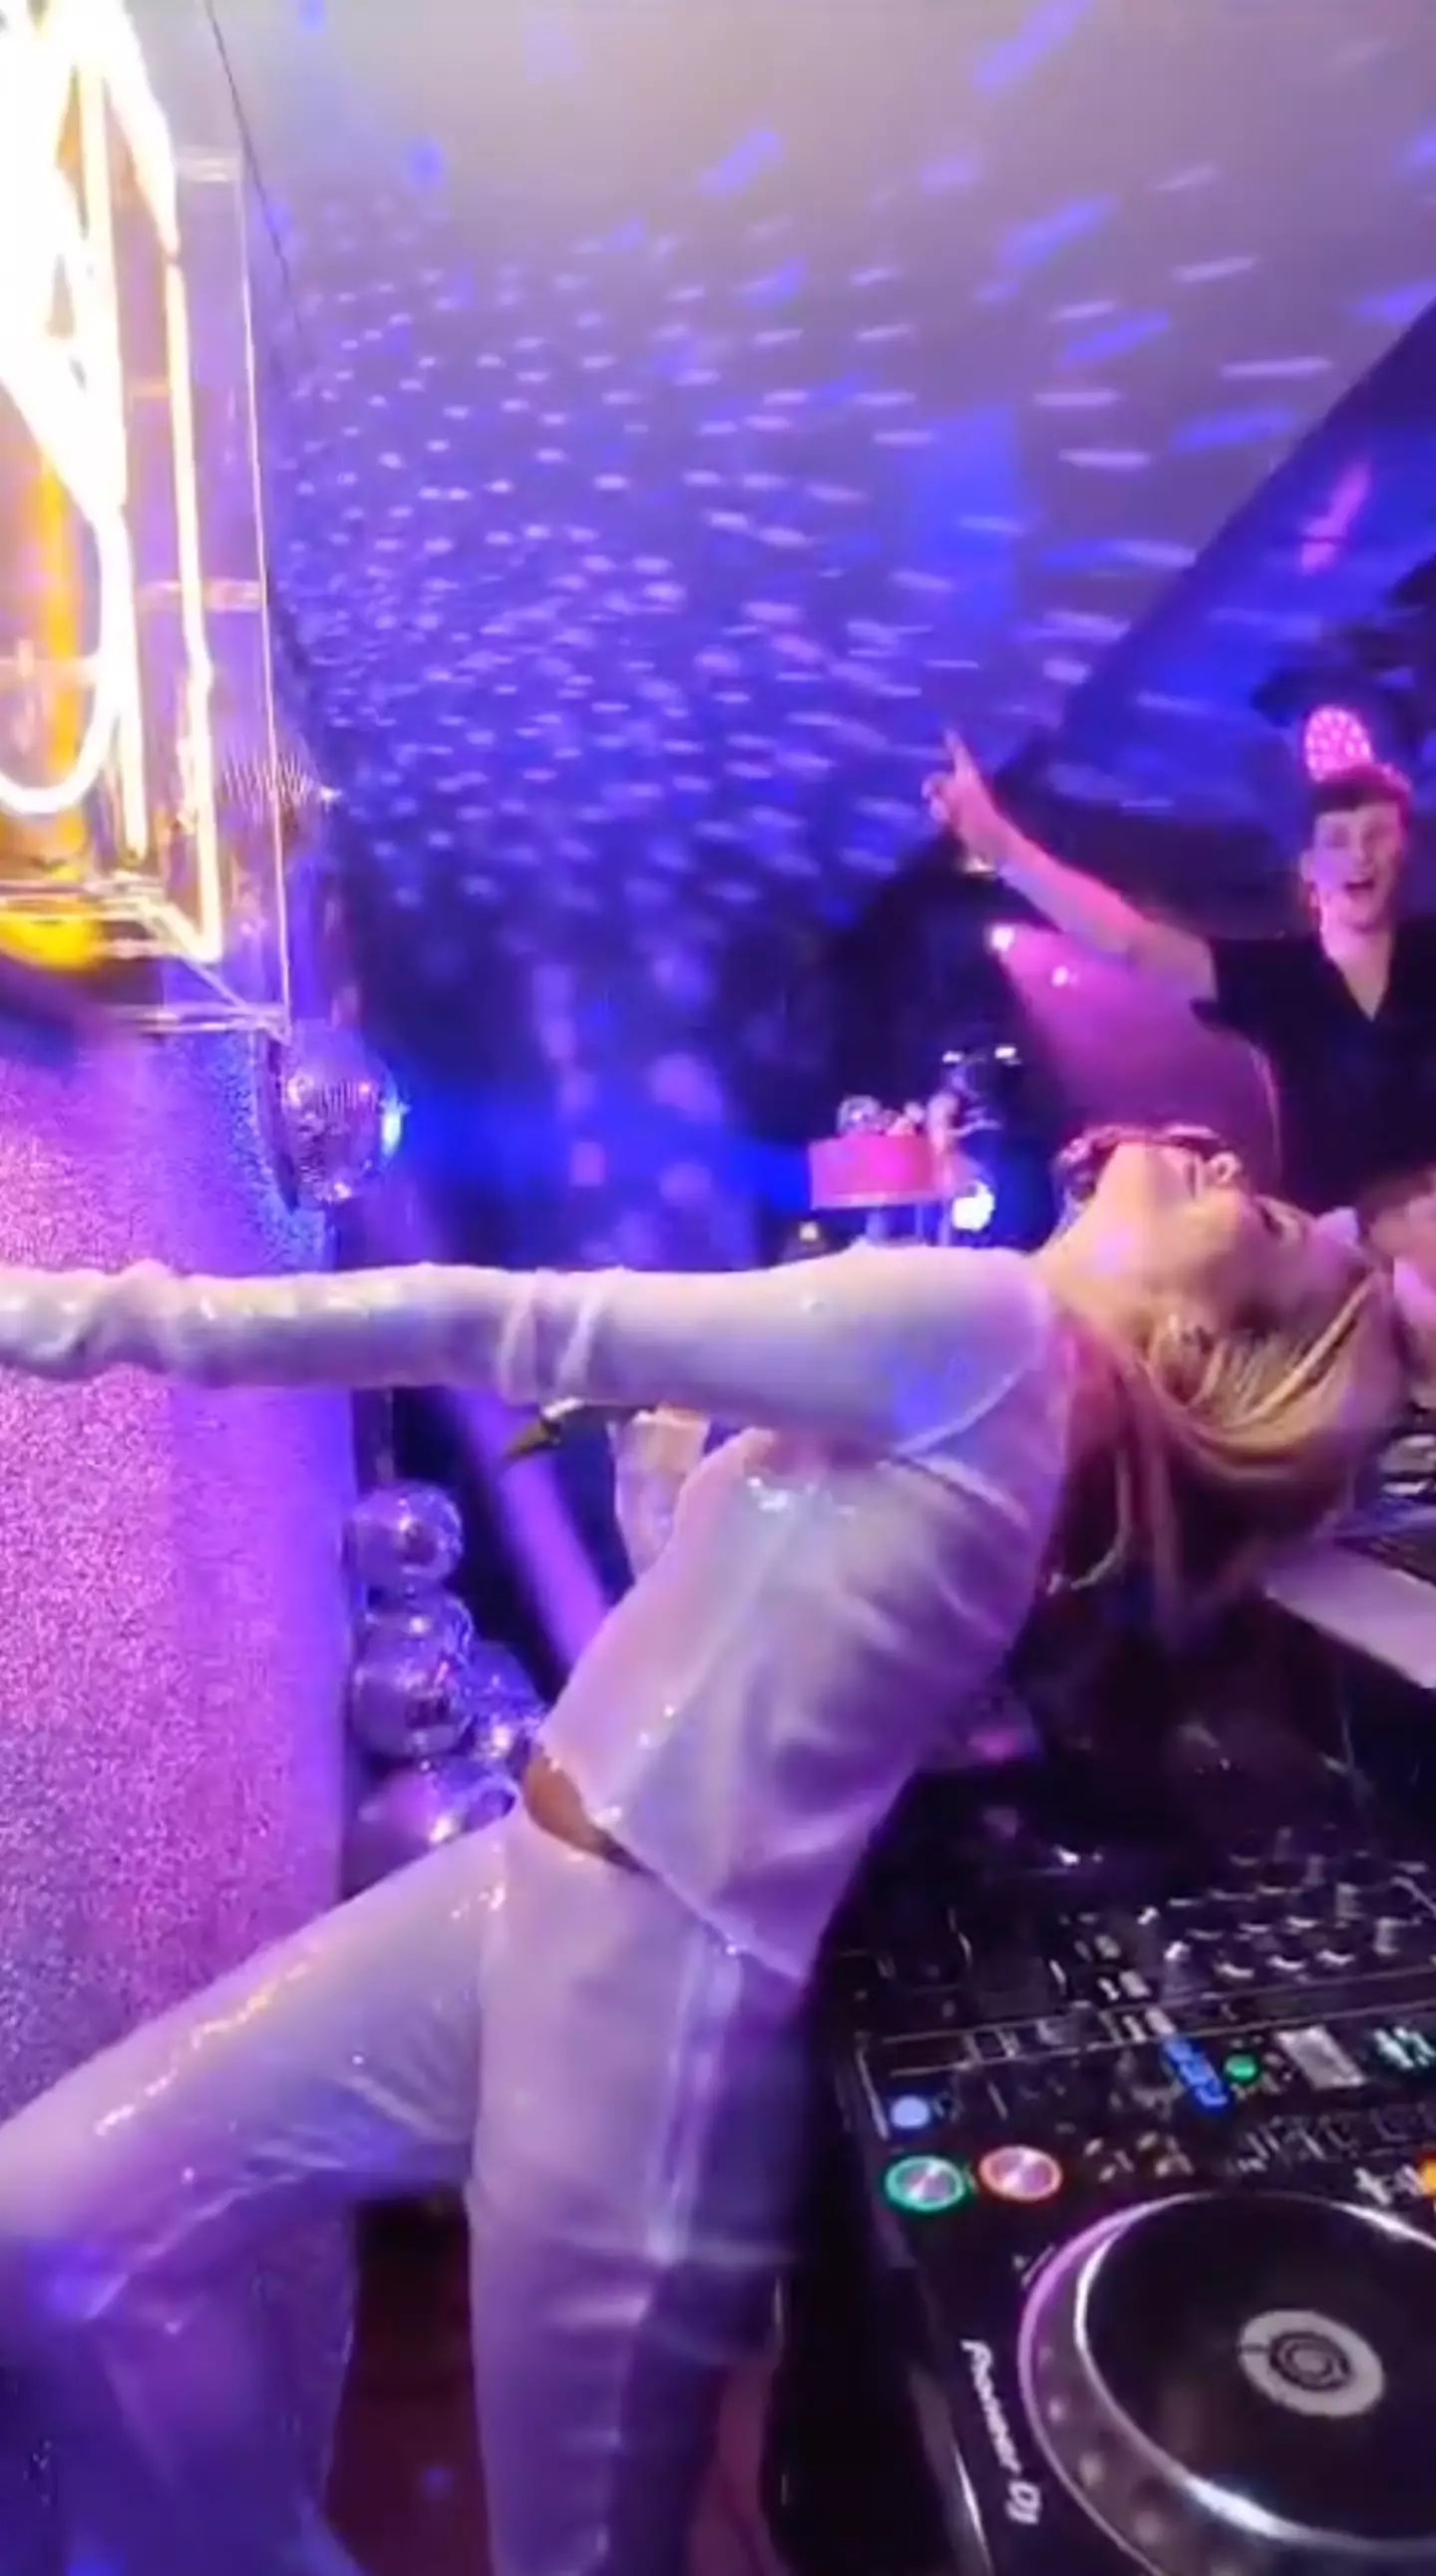 Amanda Holden shared a clip from her daughter's 18th birthday party to Instagram.